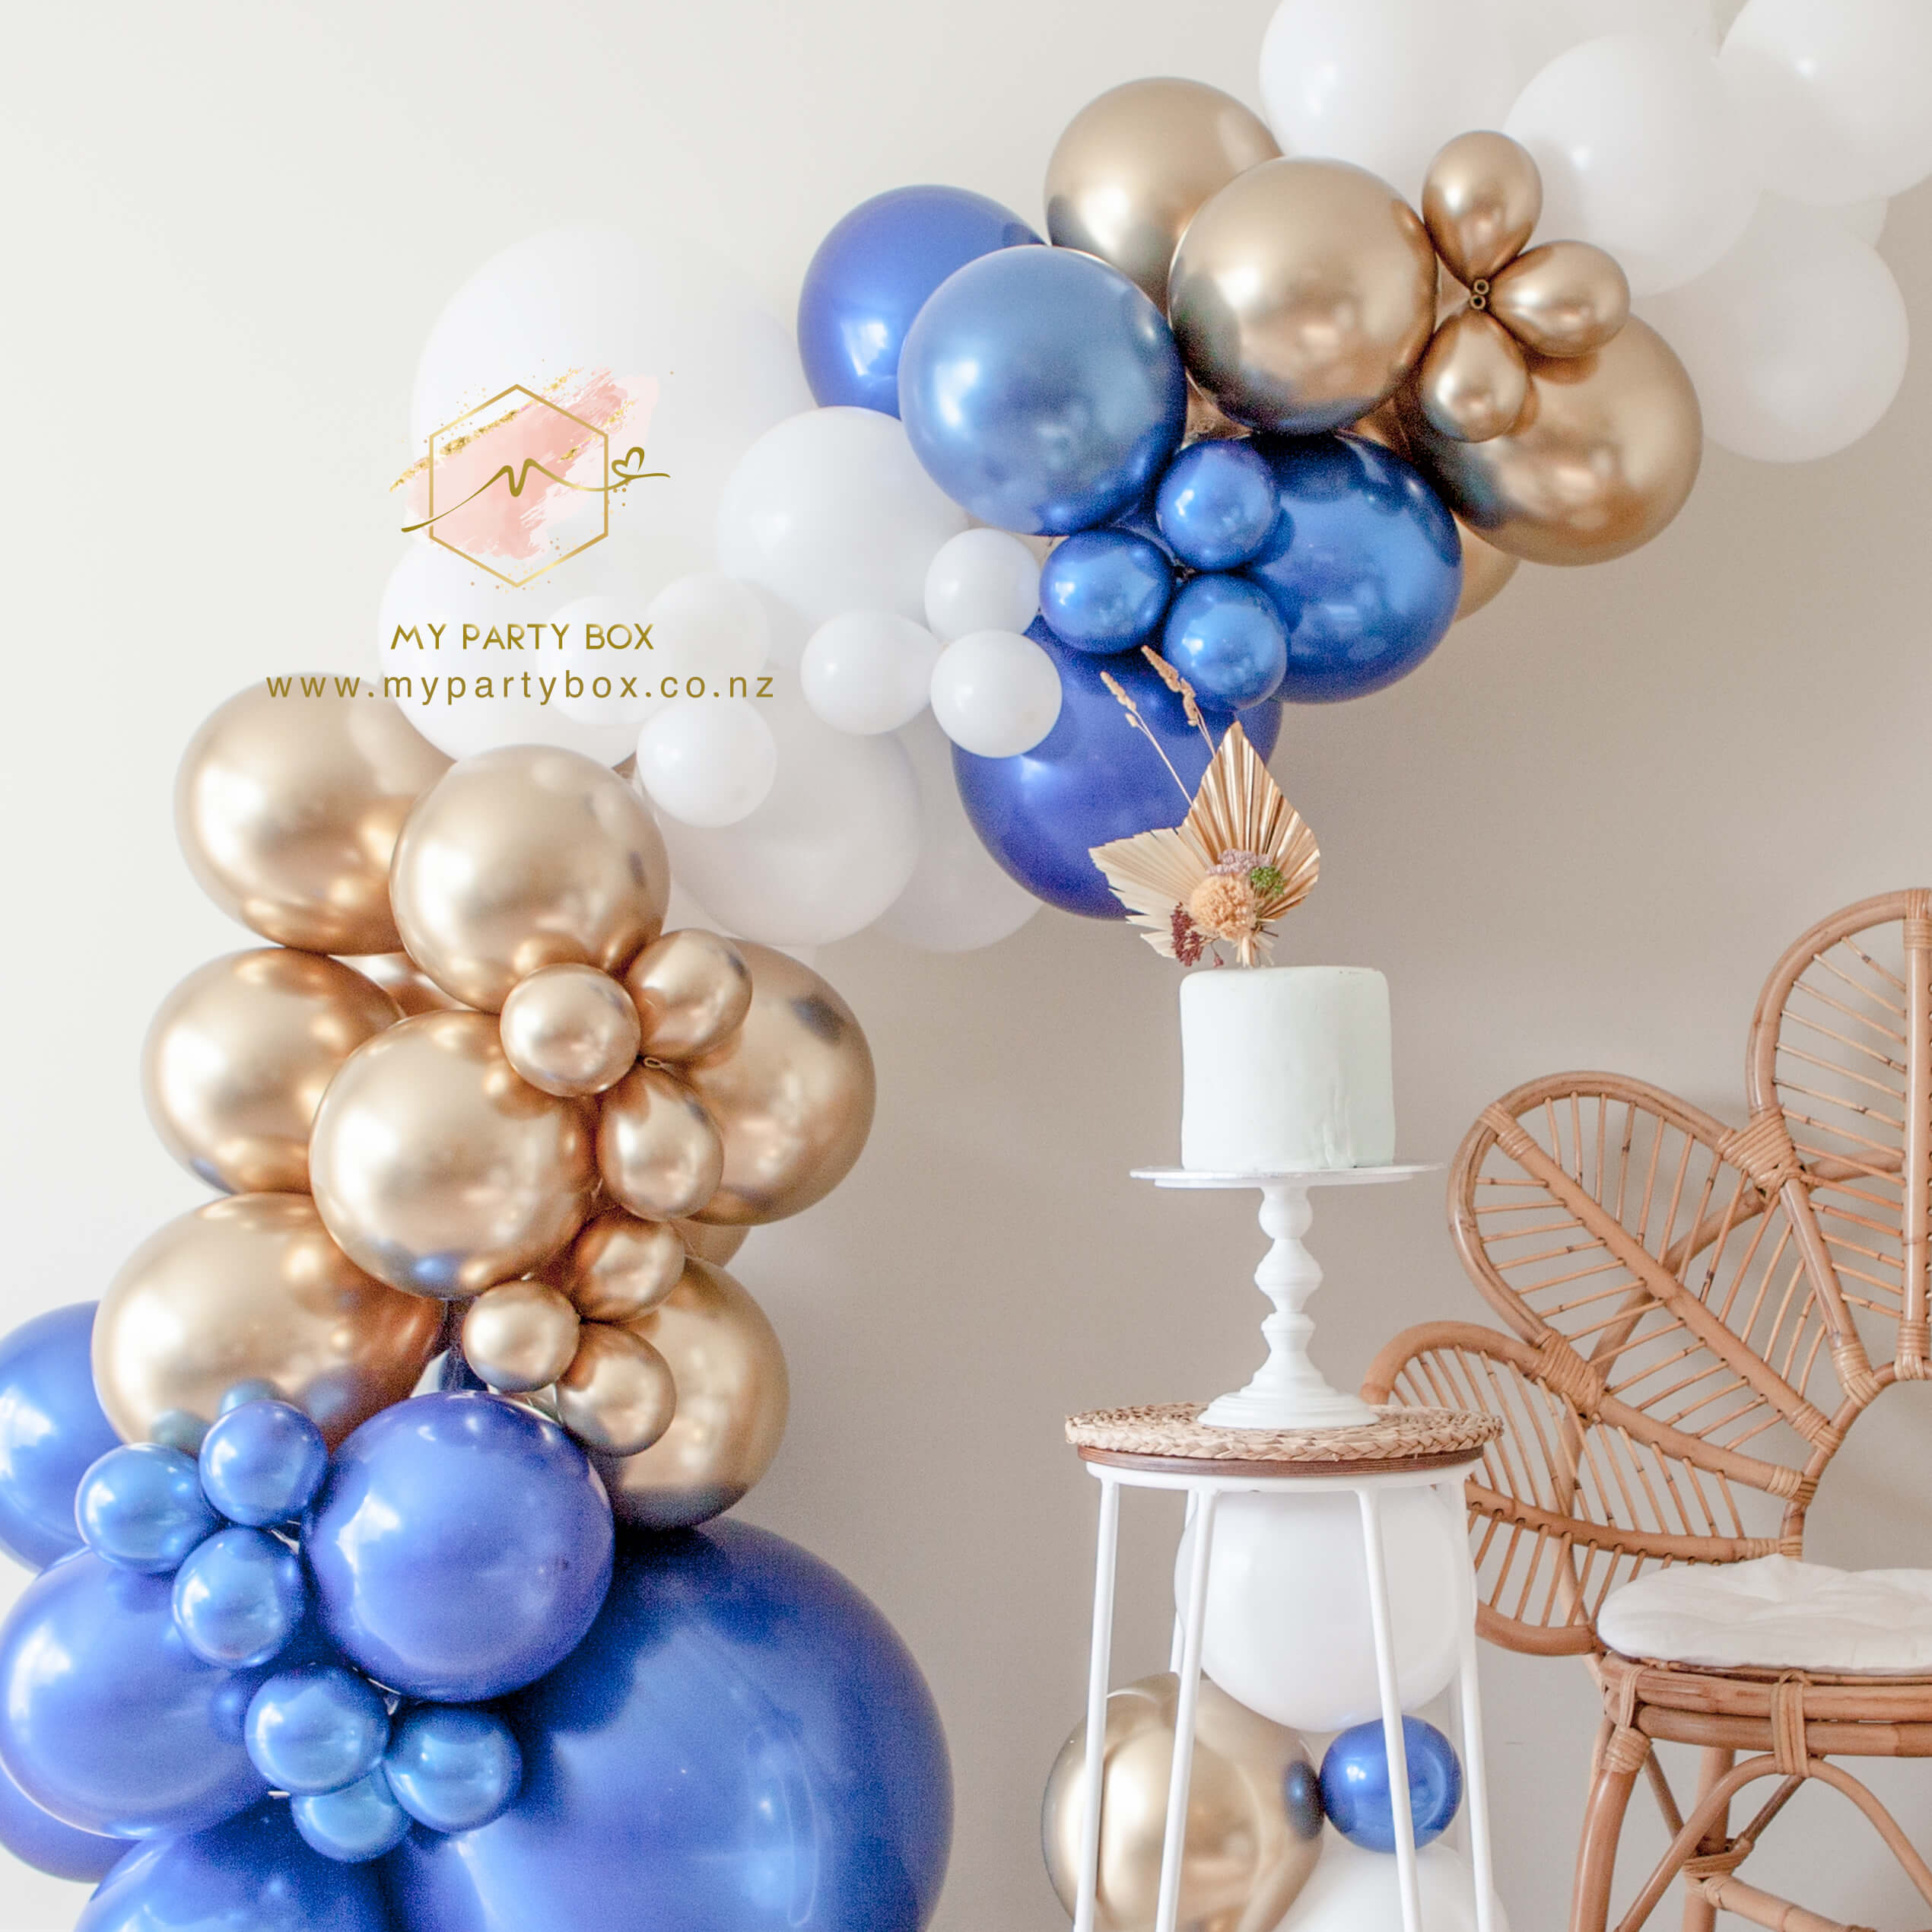 My Party Box Milestone Birthday Garland DIY Kit - Sapphire Blue with Sapphire Blue, Reflex Gold and White latex balloons